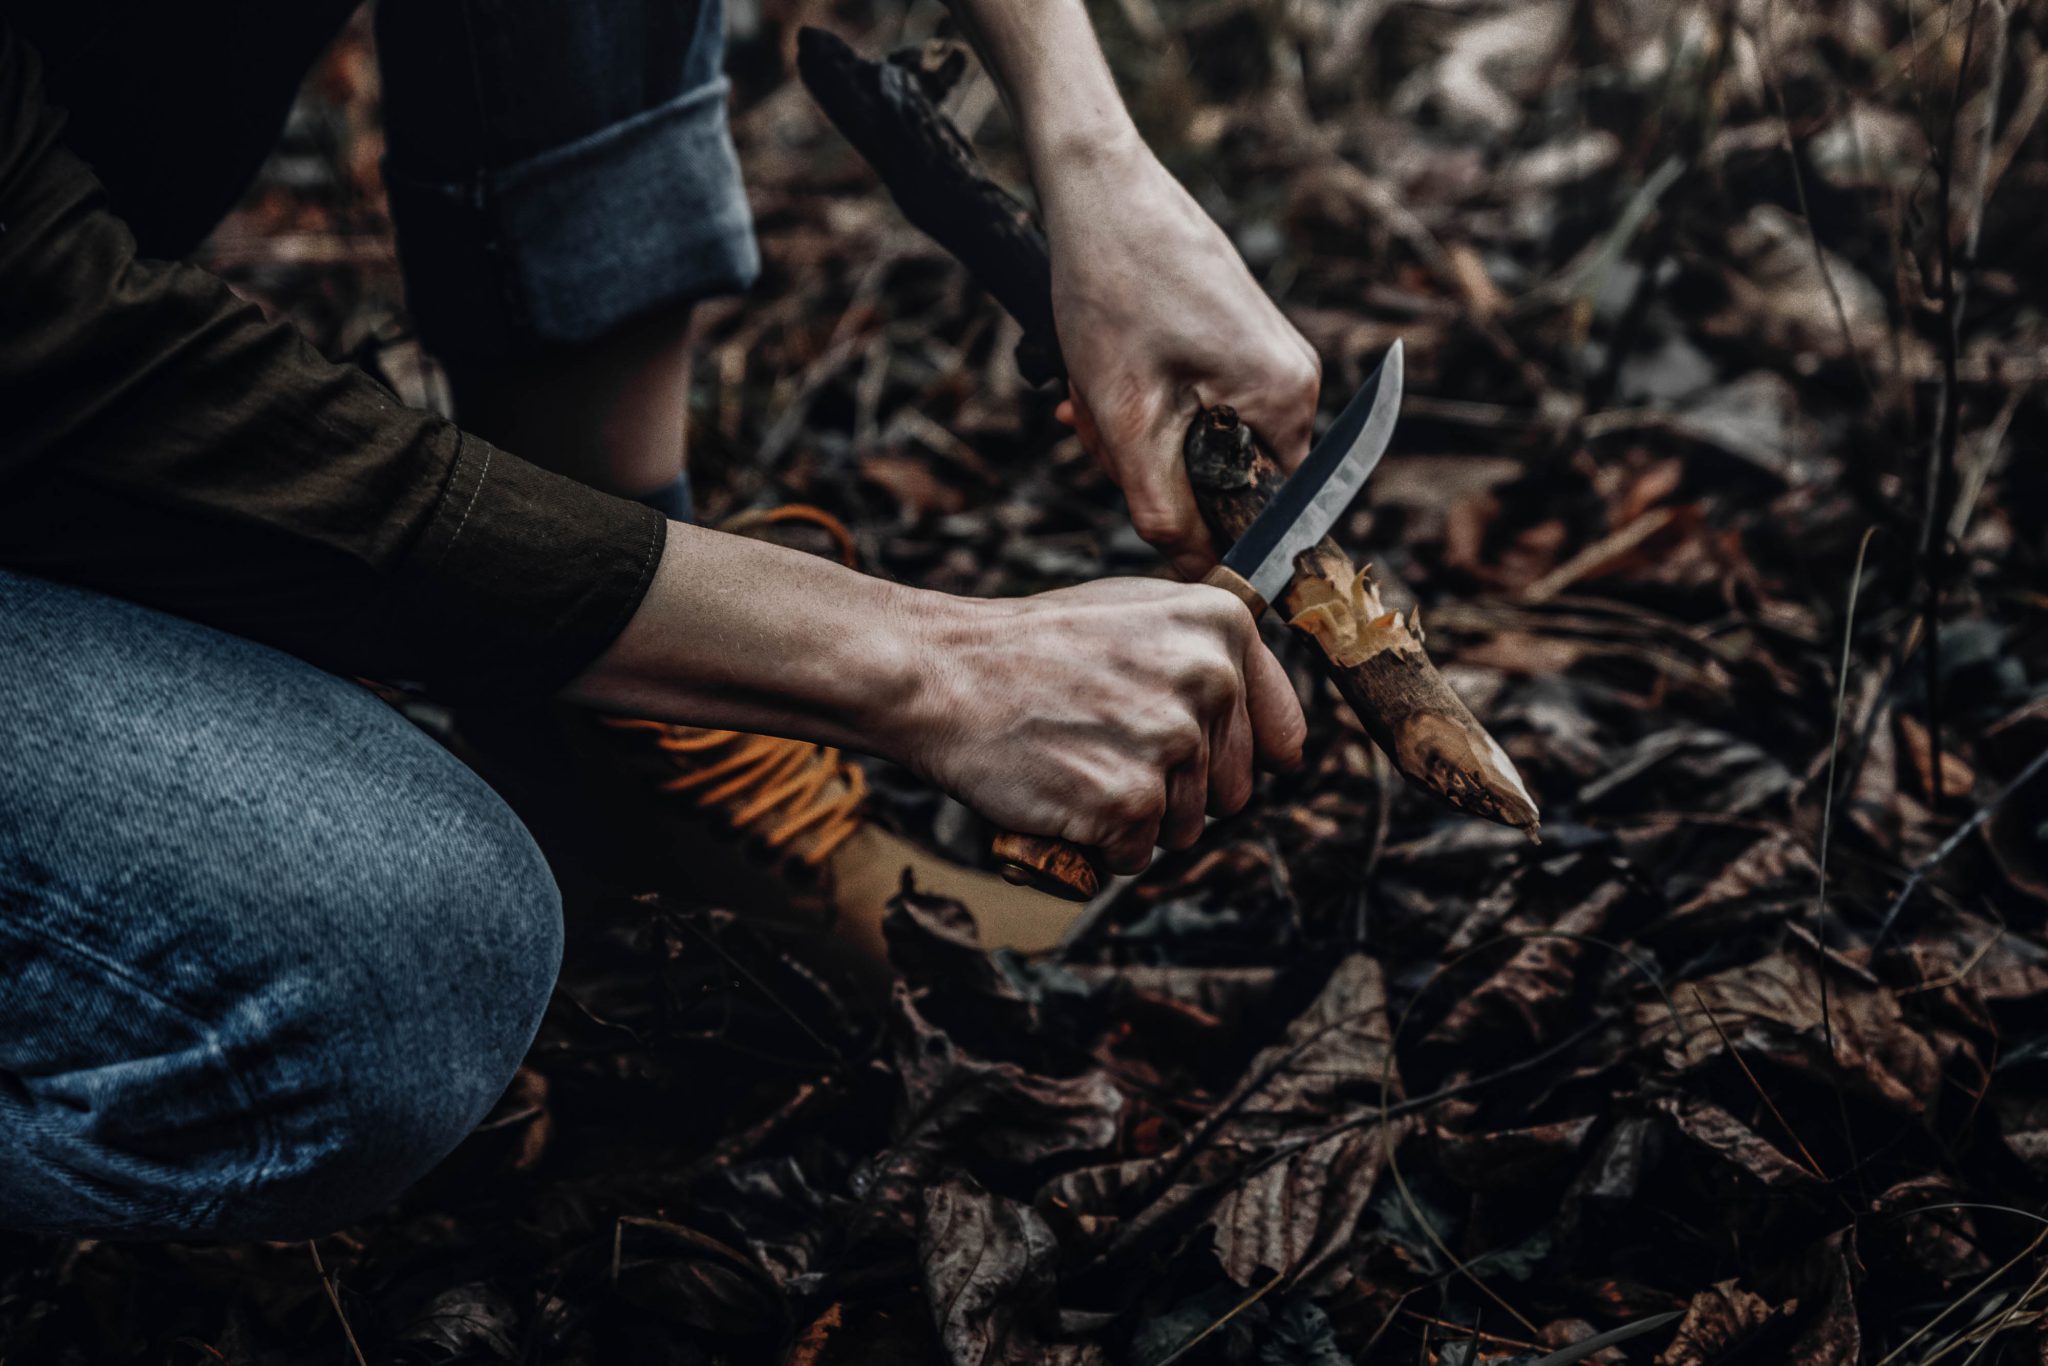 whittling with a knife